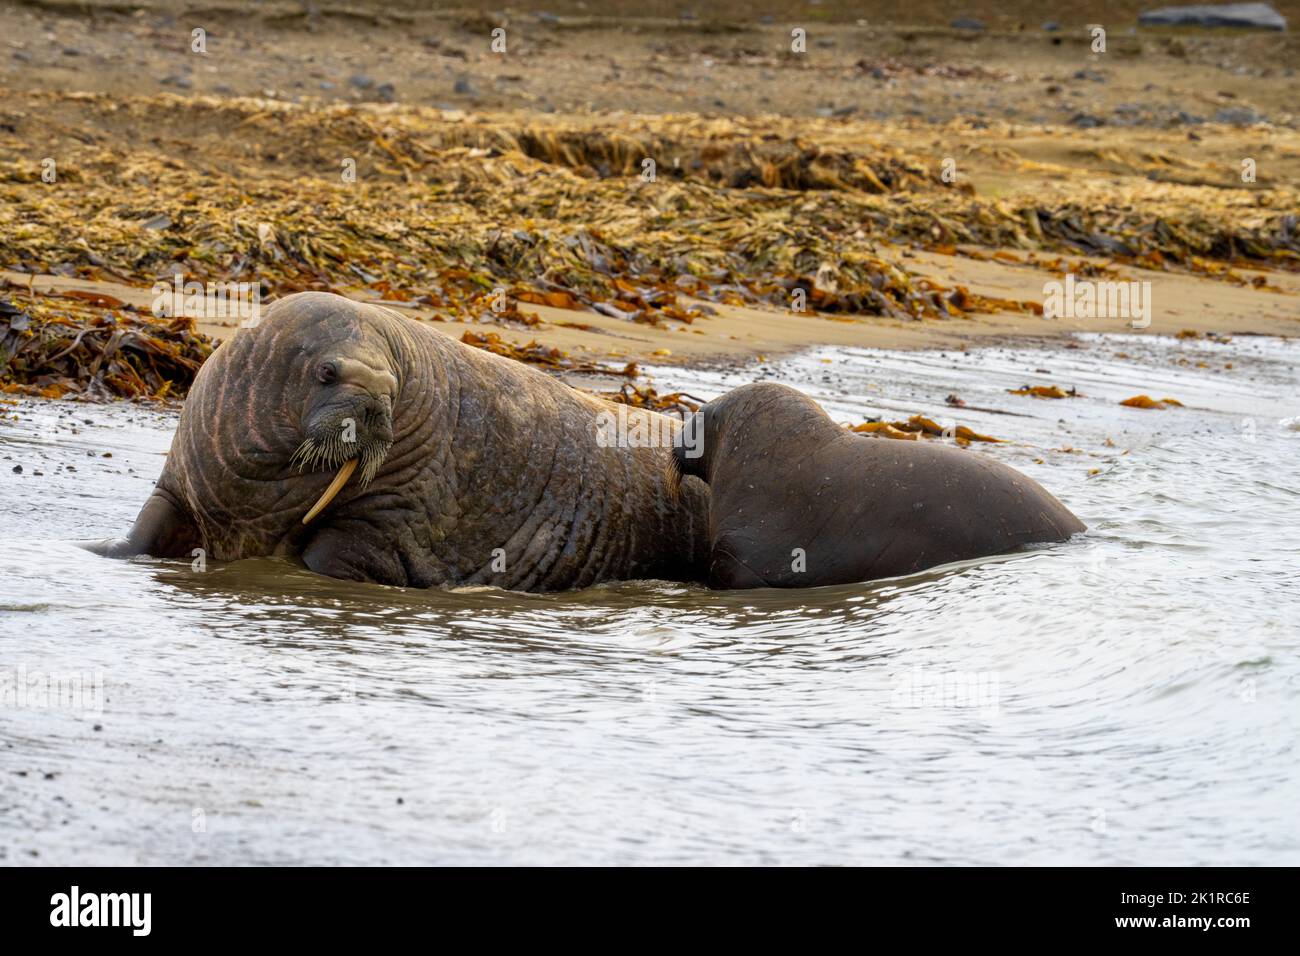 Atlantic walrus (Odobenus rosmarus). This large, gregarious relative of the seal has tusks that can reach a metre in length. Both the male (bulls) and Stock Photo